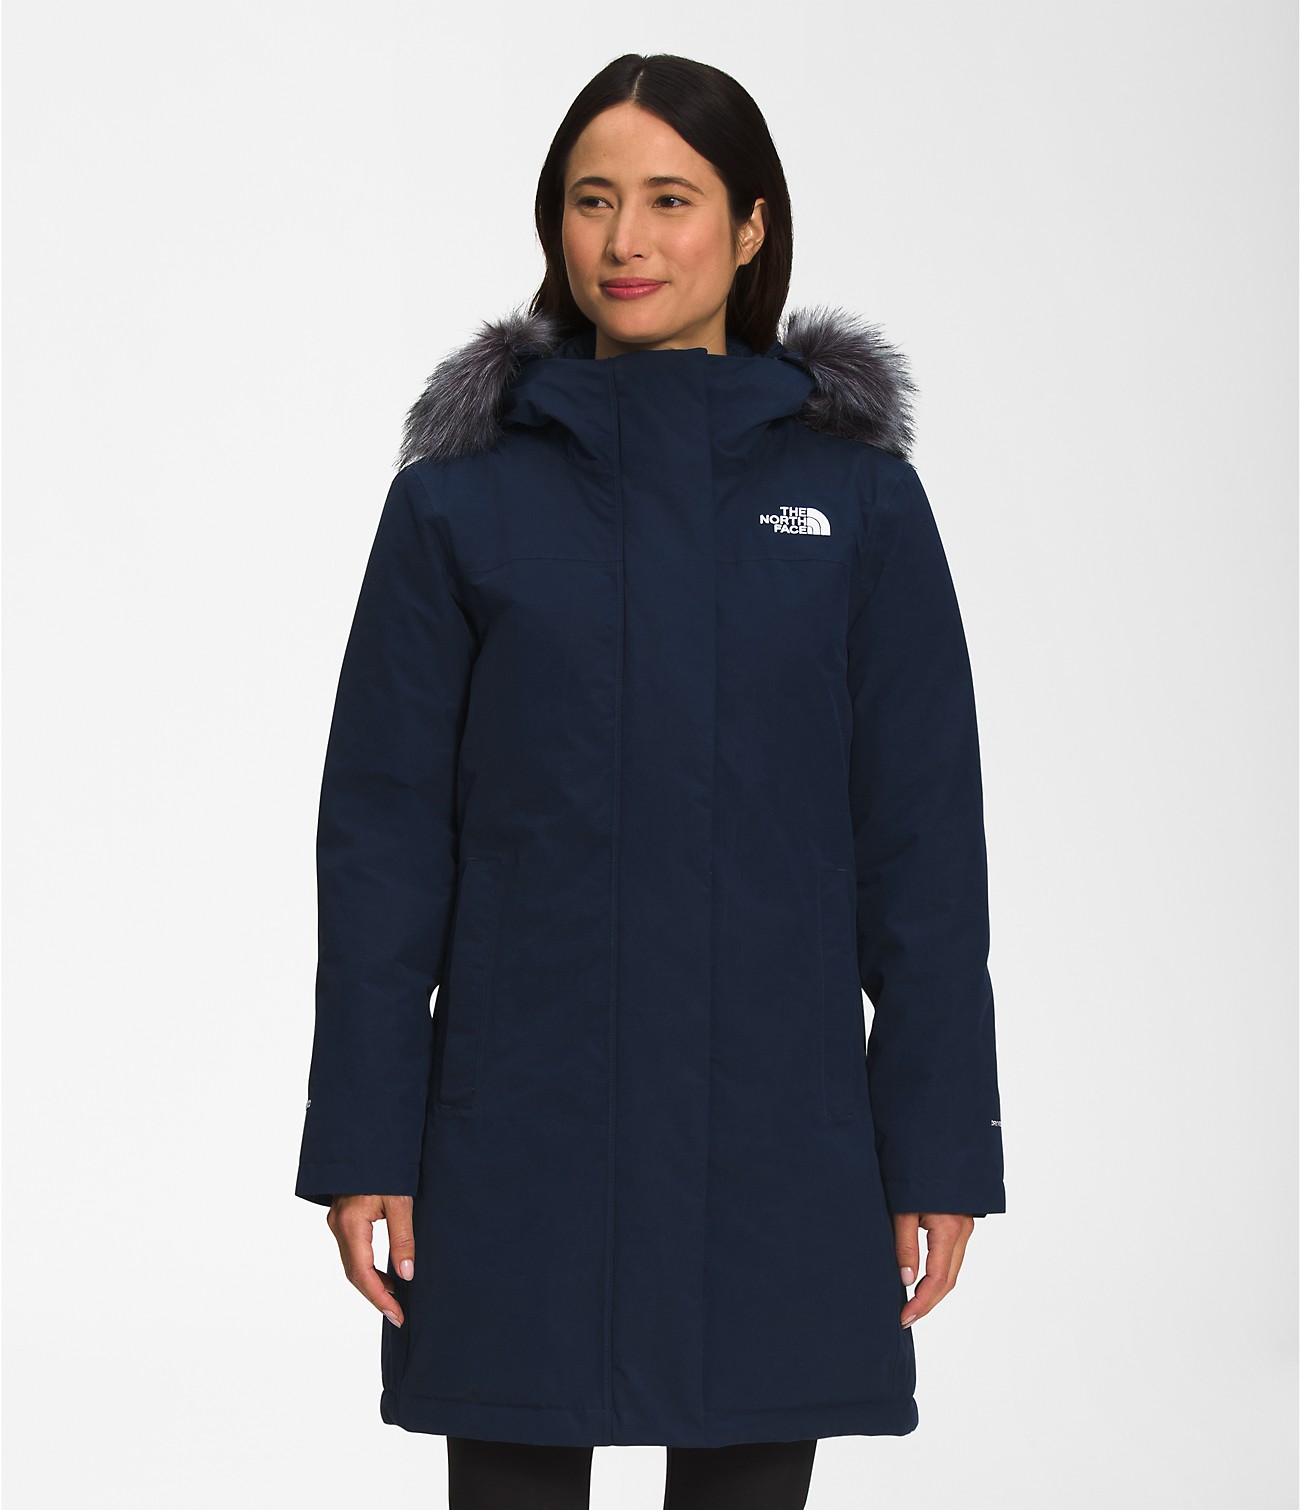 Unlock Wilderness' choice in the Lands' End Vs North Face comparison, the Arctic Parka by The North Face